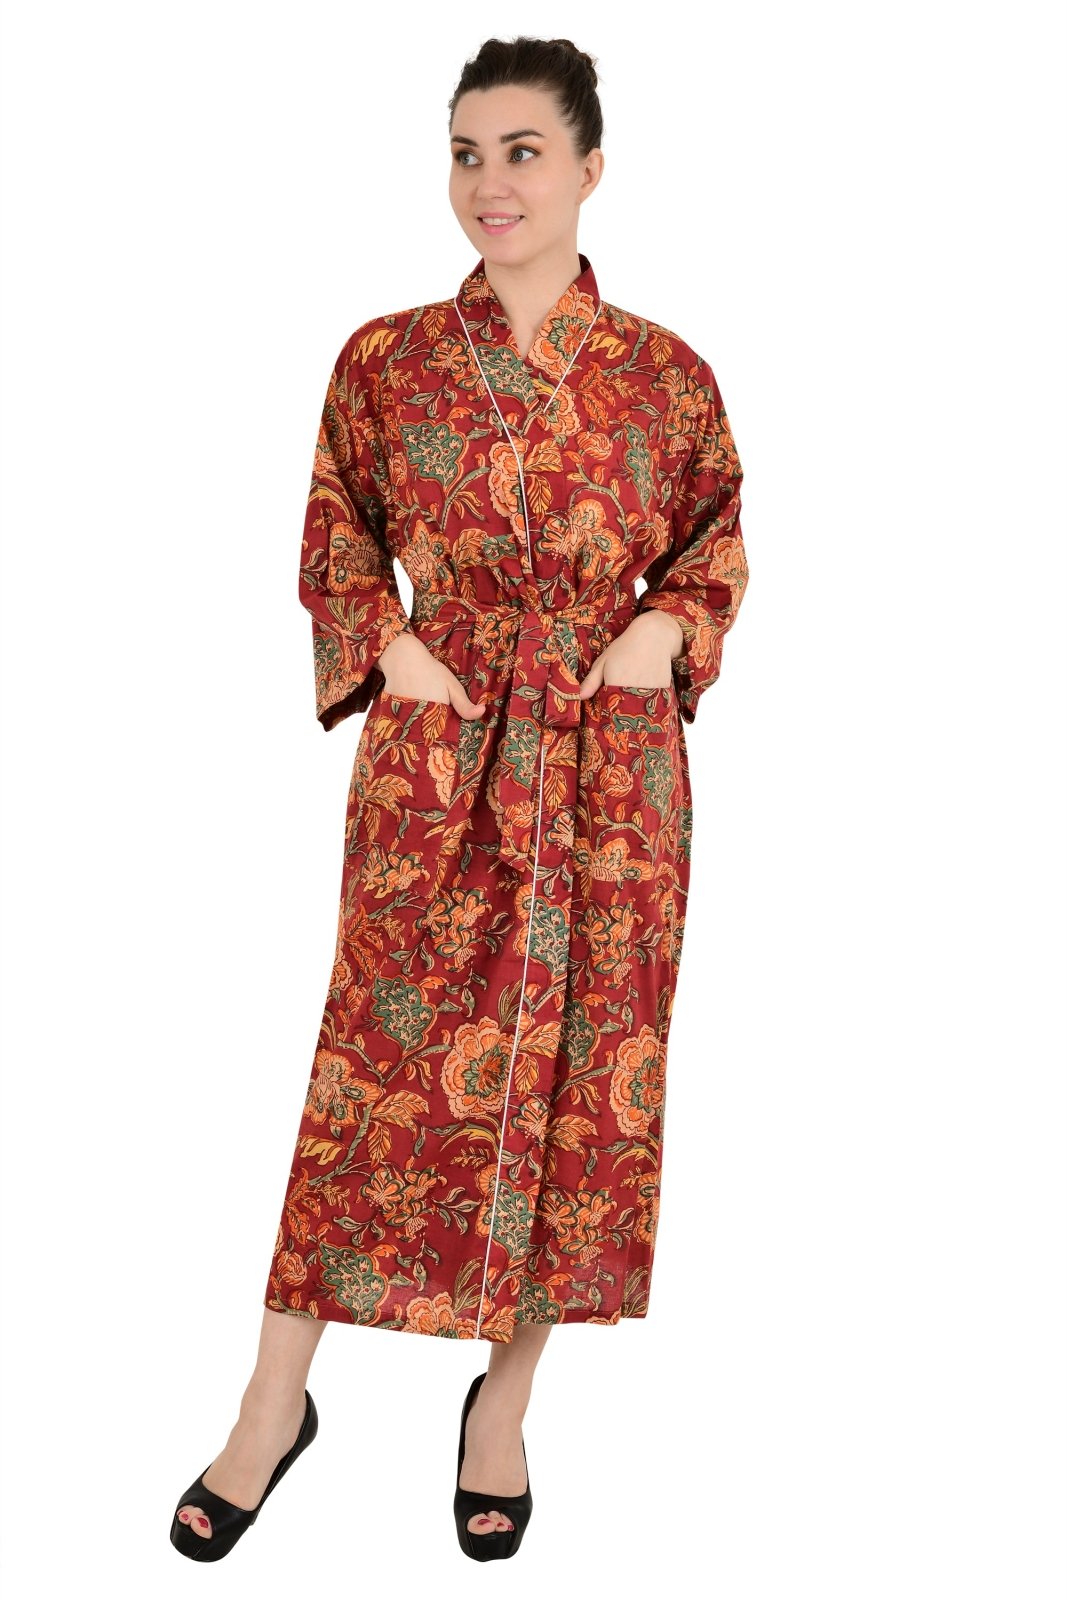 Pure Cotton Spring Summer Boho House Robe Kimono Indian Handblock Jaipur Indian Dress Red Green Floral Luxury Beach Holiday Wear Yacht Cover Up - The Eastern Loom